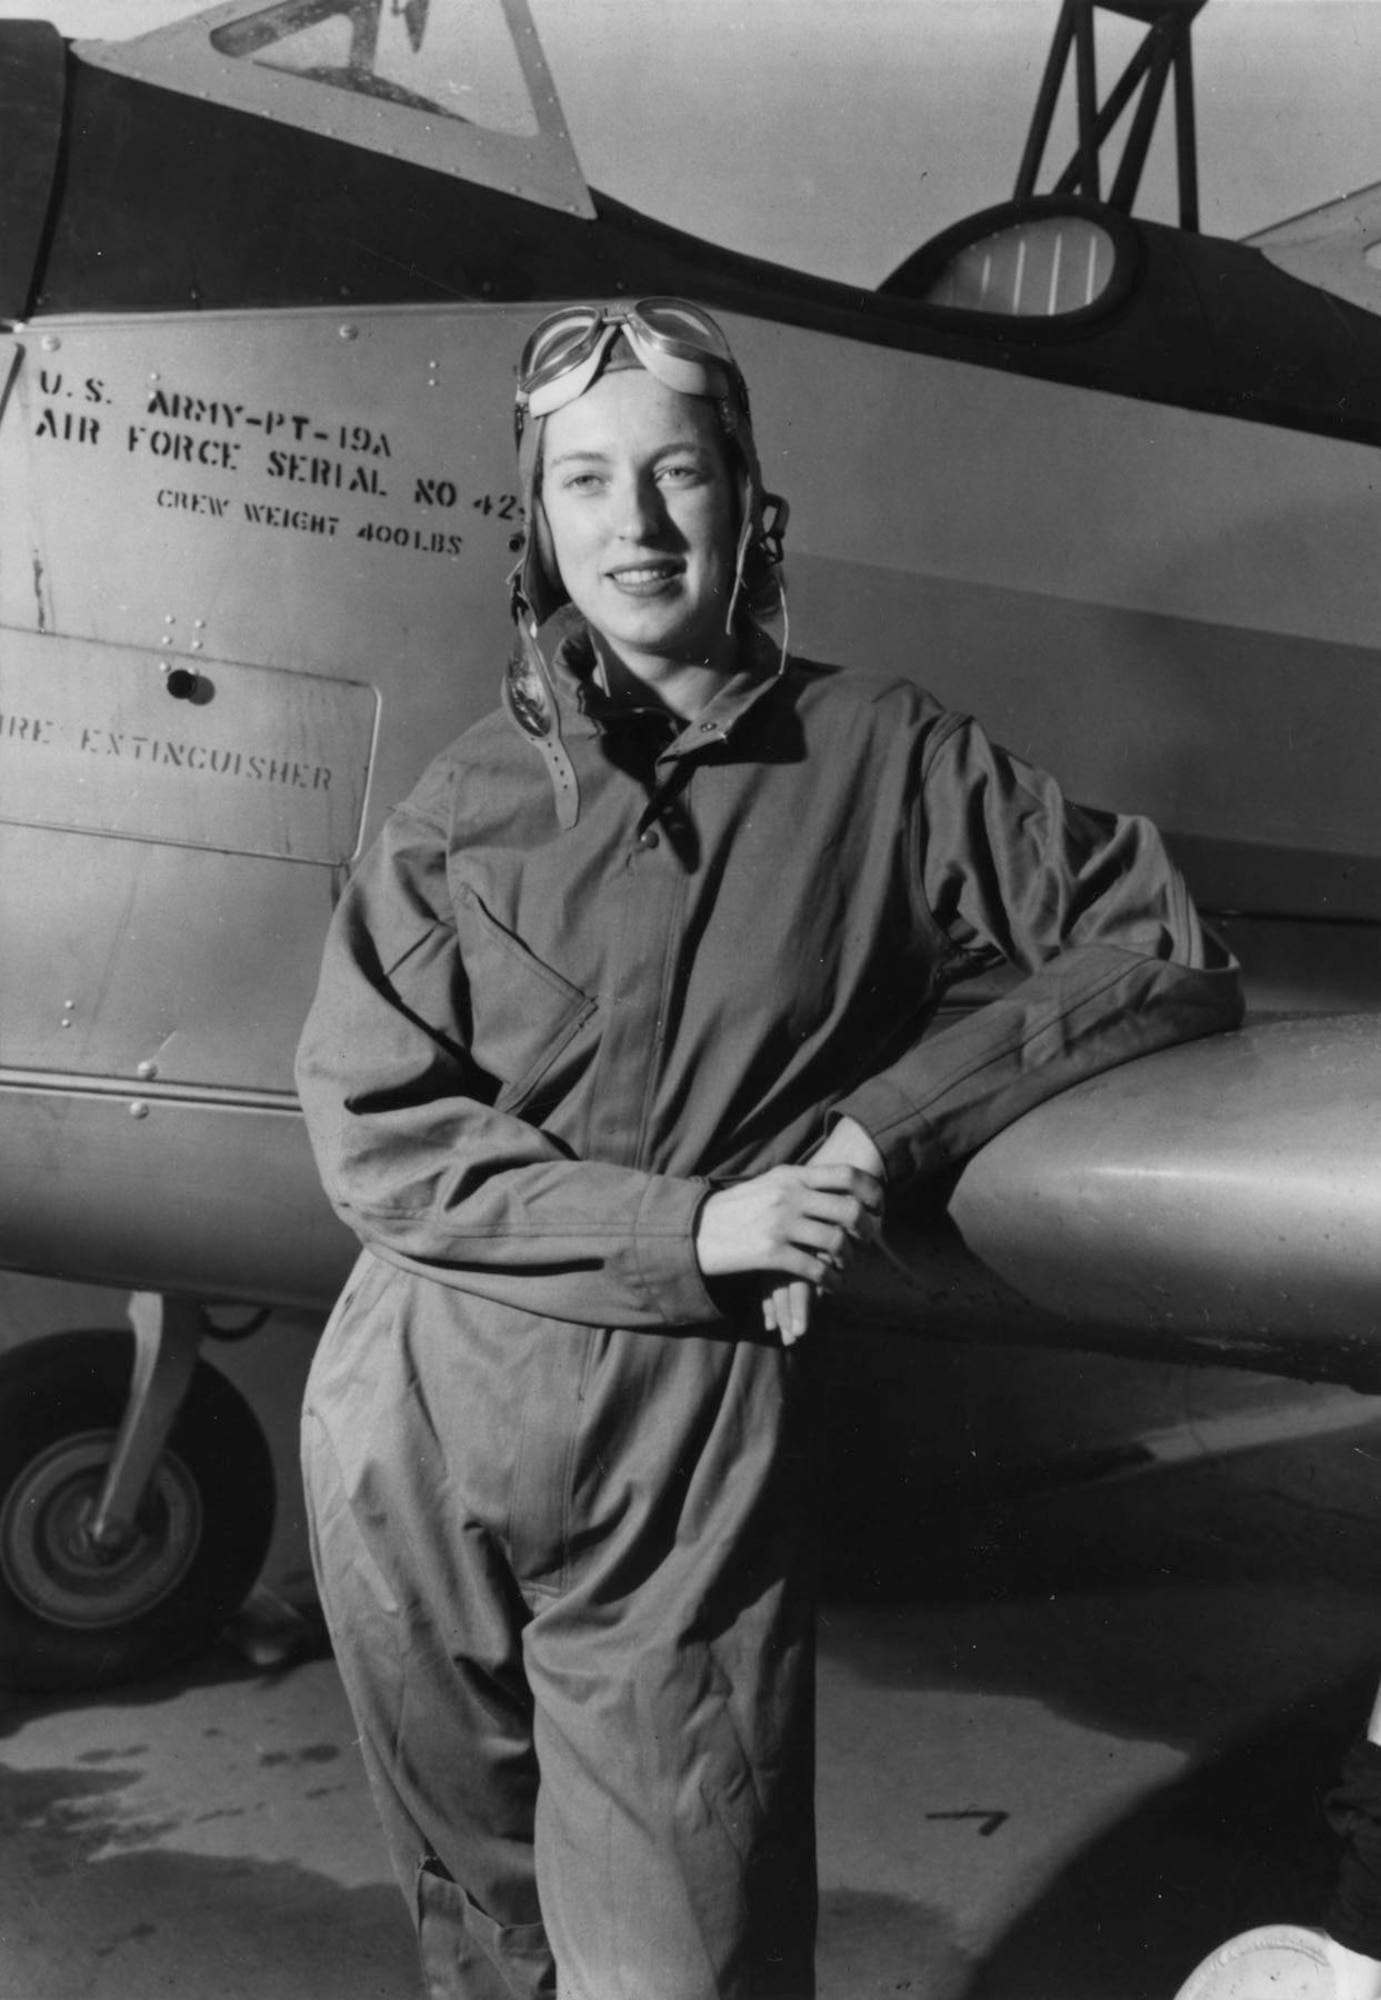 Cornelia Fort (with a PT-19A) was a civilian instructor pilot at an airfield near Pearl Harbor, Hawaii, when the Japanese attacked on Dec. 7, 1941. (U.S. Air Force photo)